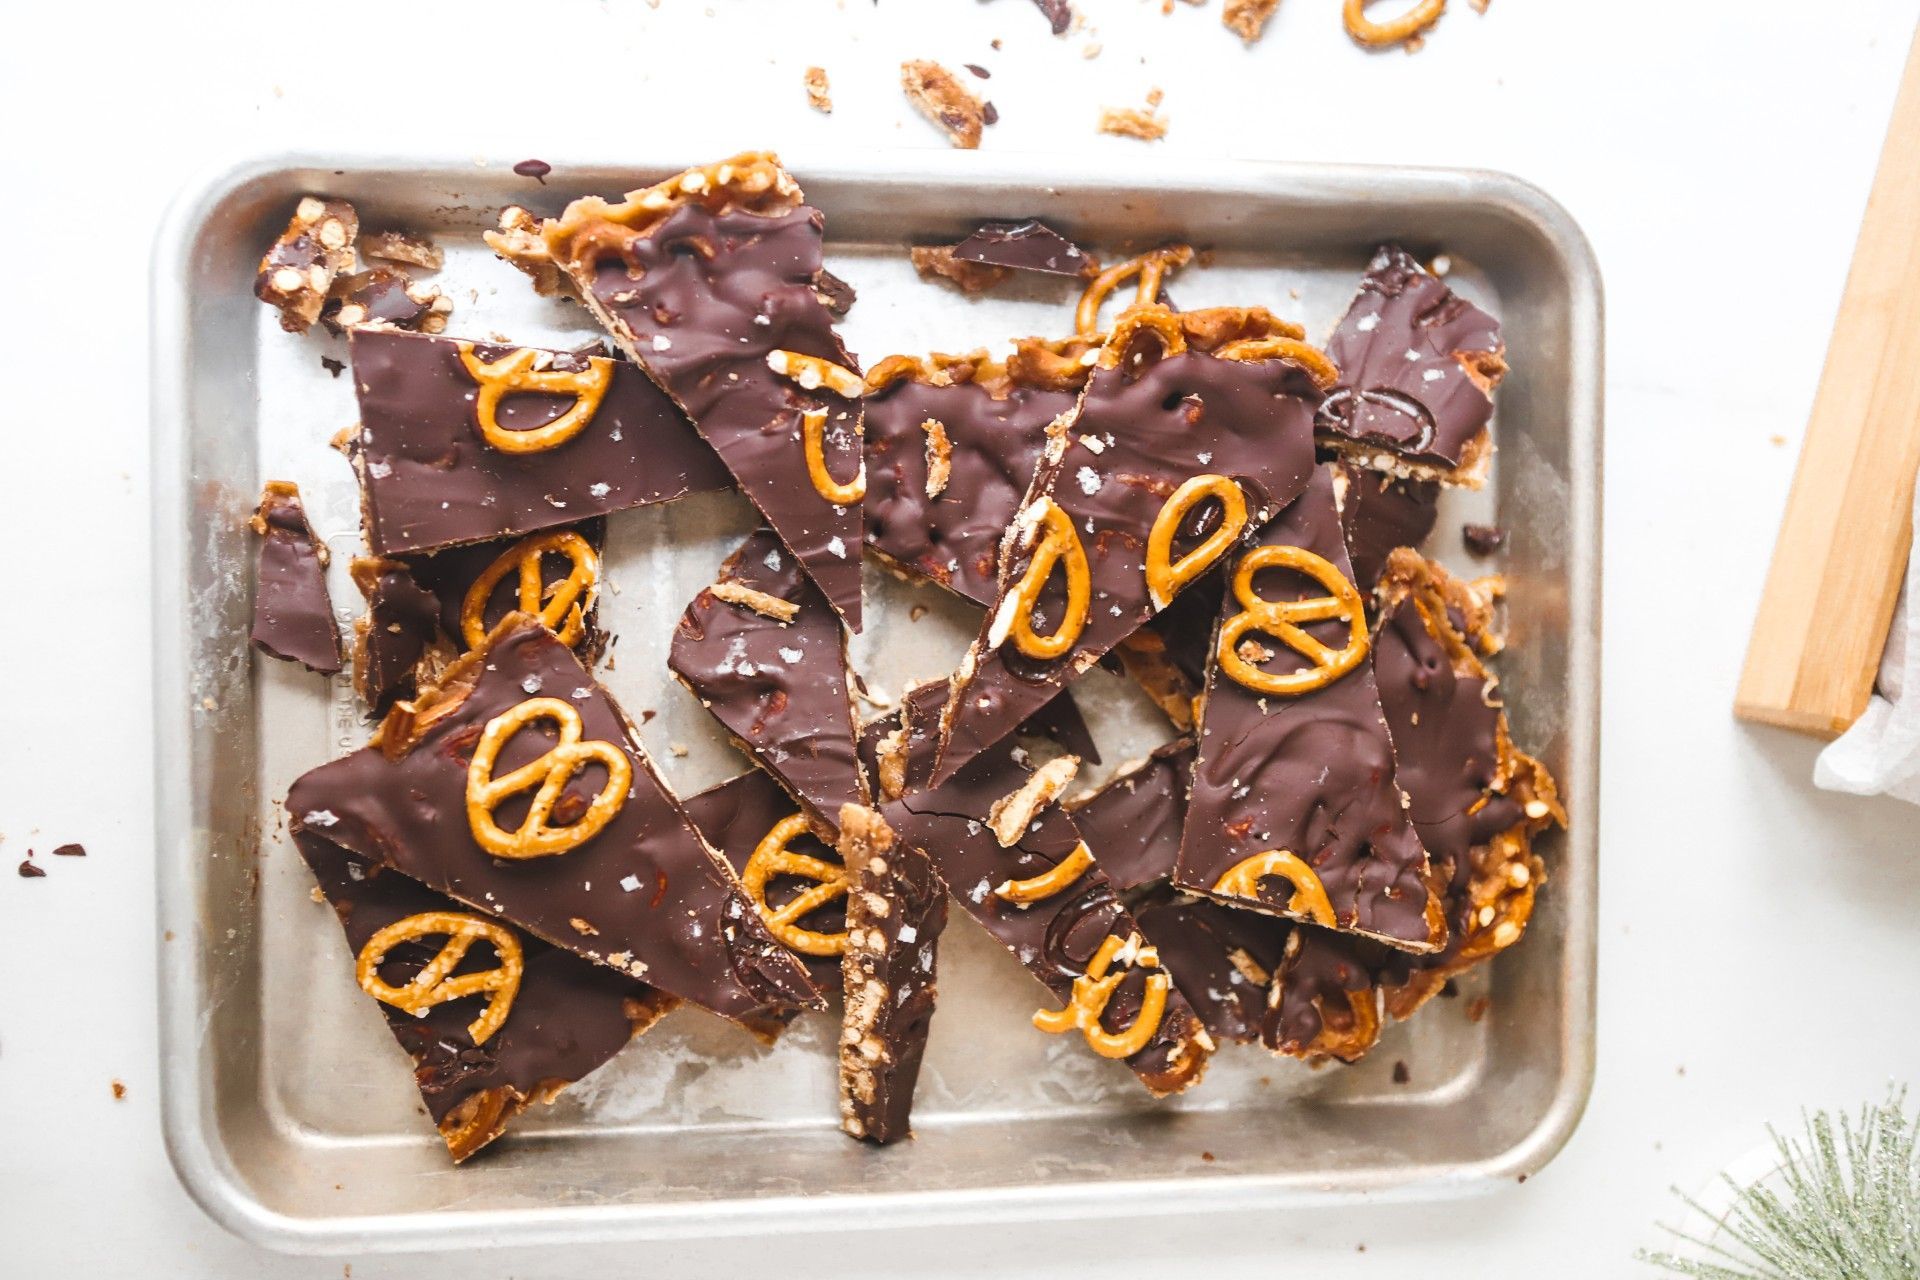 Salted toffee bark - chocolate shards with pretzel pieces on top